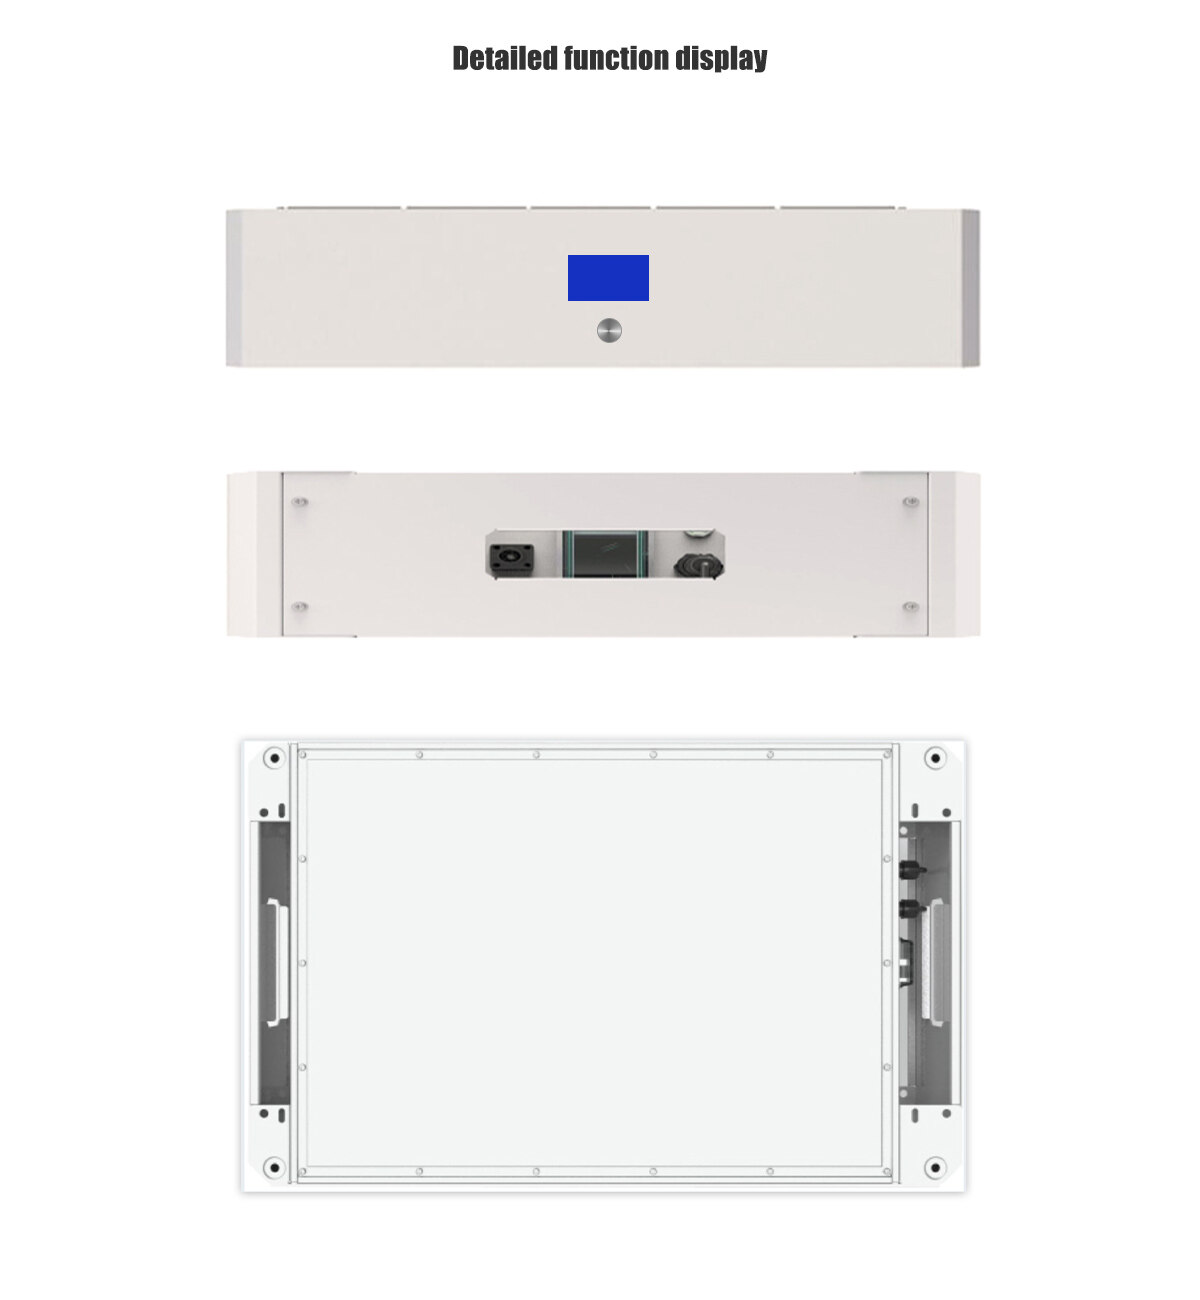 home battery solar power systems